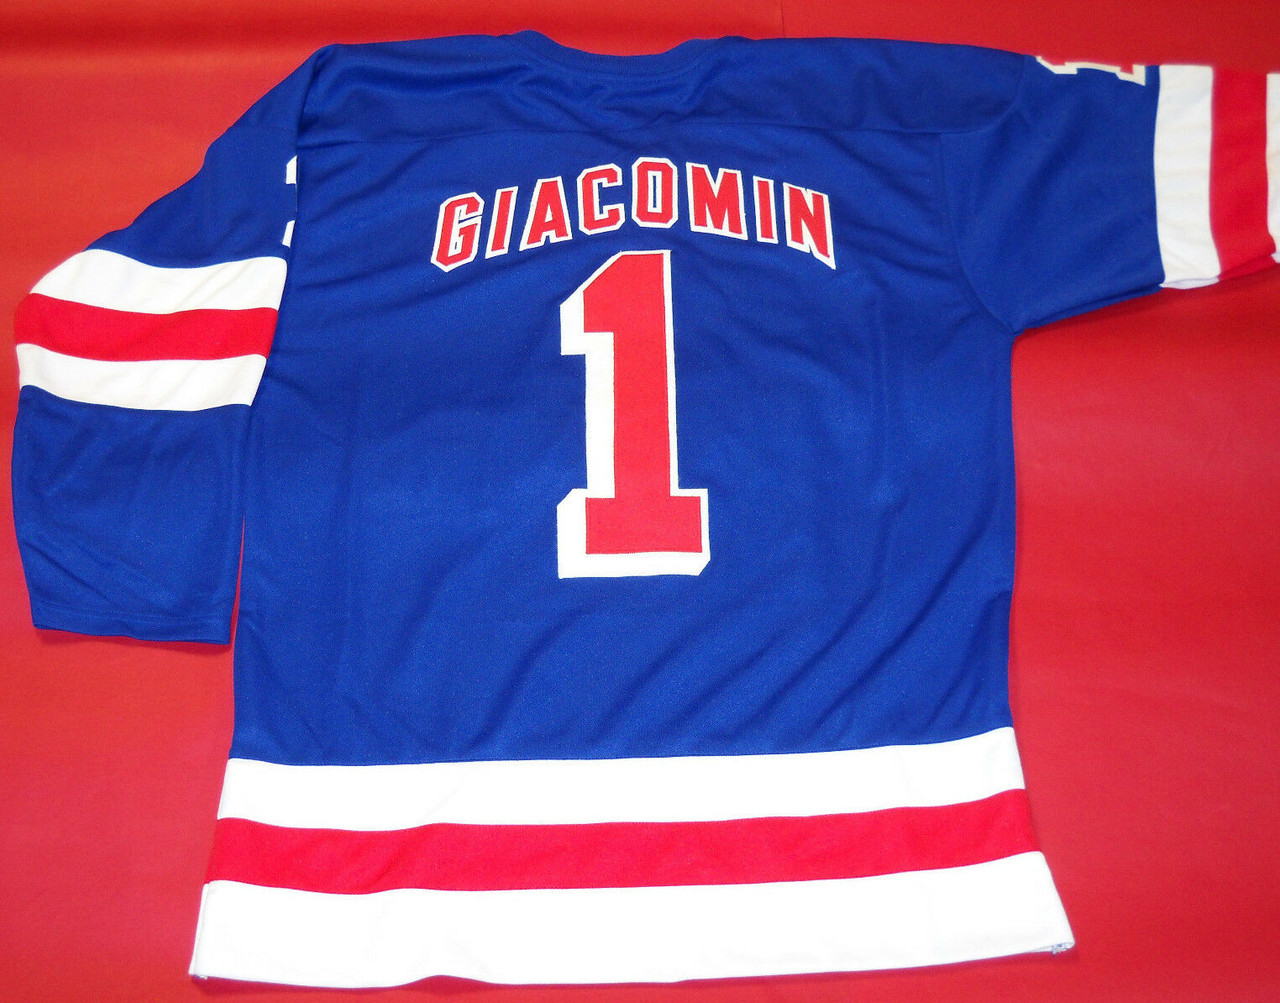 ny rangers jersey numbers